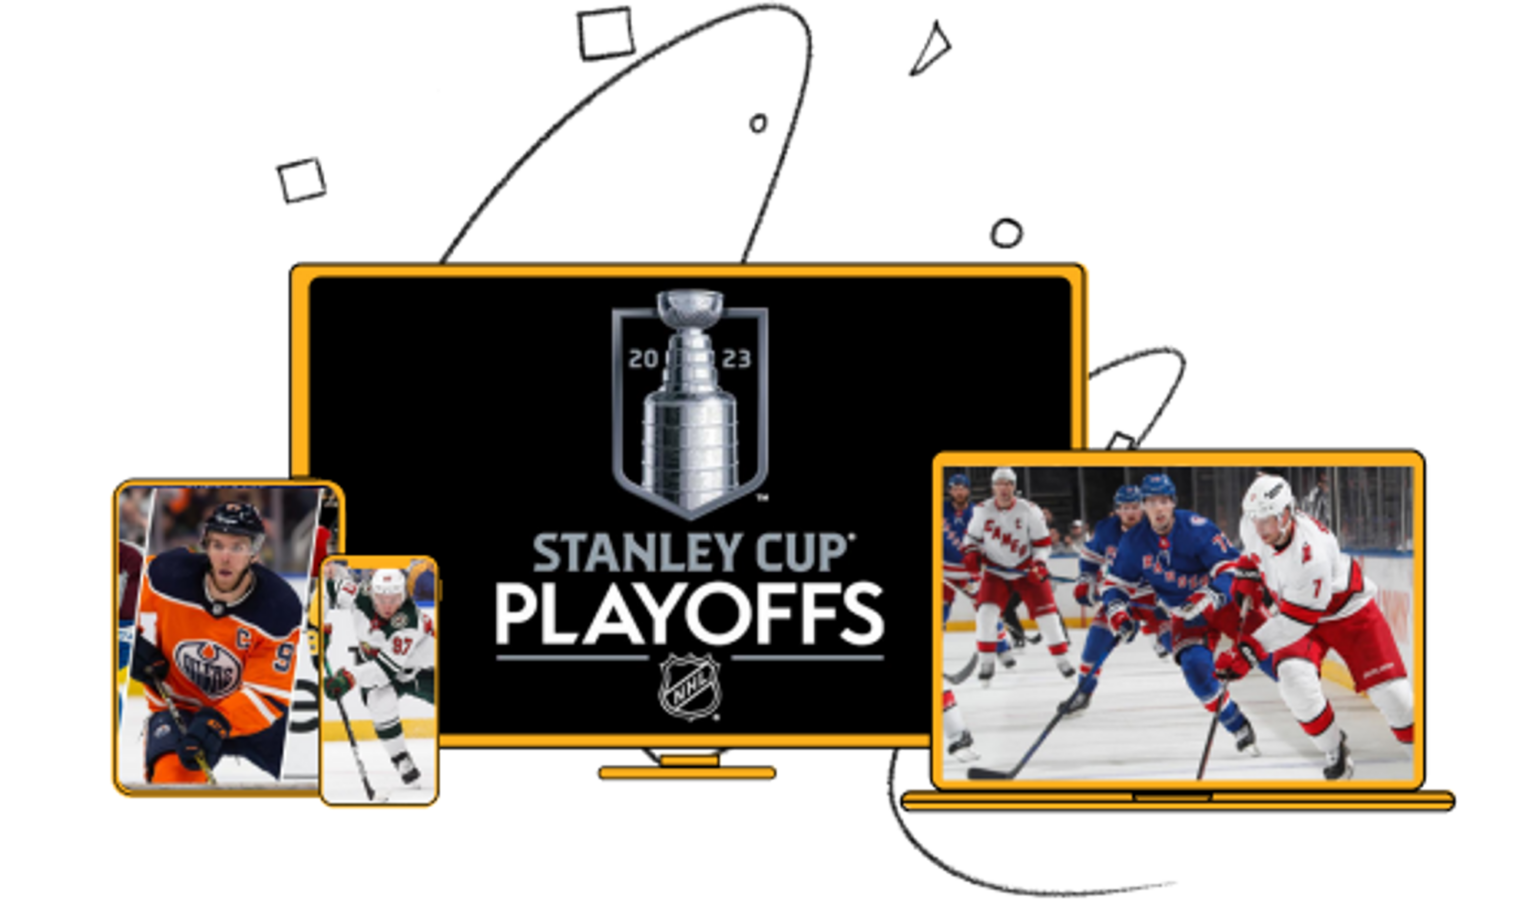 How to Watch Stanley Cup Playoffs Live Stream in the UK